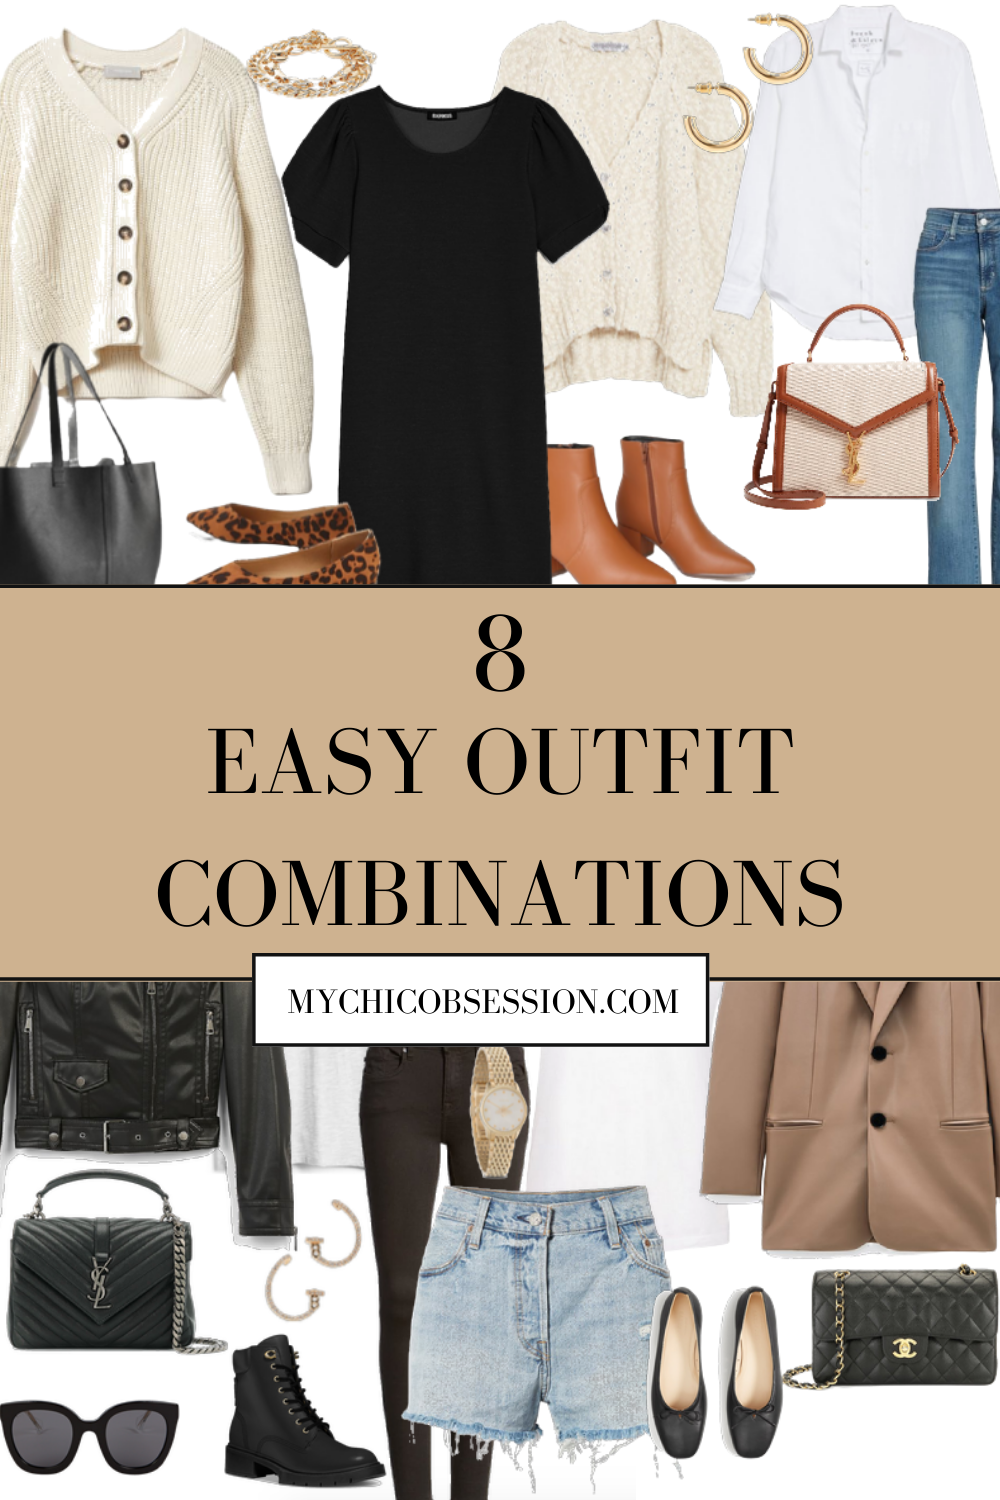 easy outfit combinations - outfit ideas